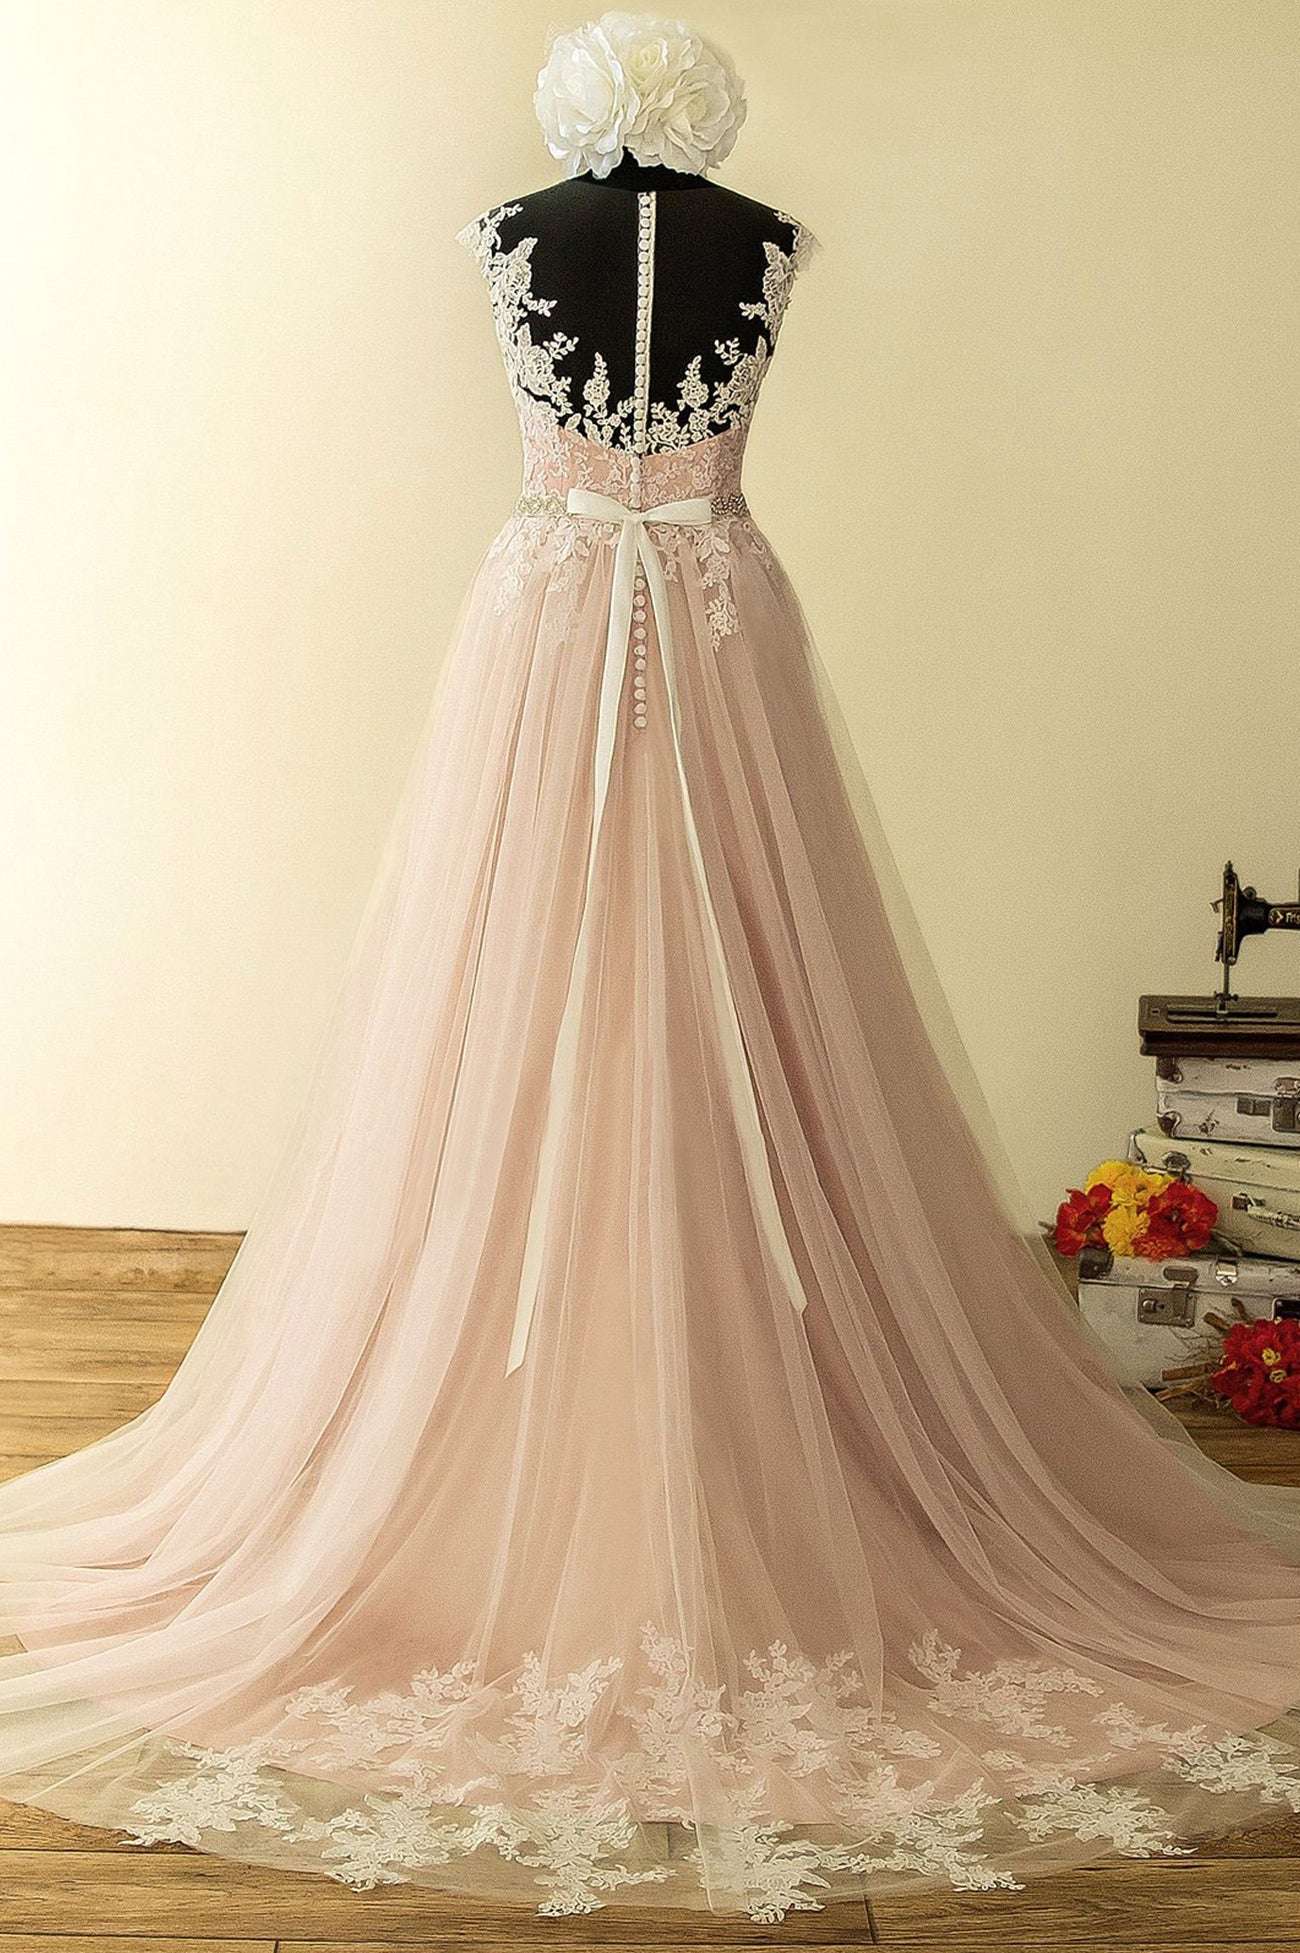 Prom Dress Styling Hair, Elegant Tulle Lace Long Prom Dress, A-Line Scoop Neckline Evening Dress